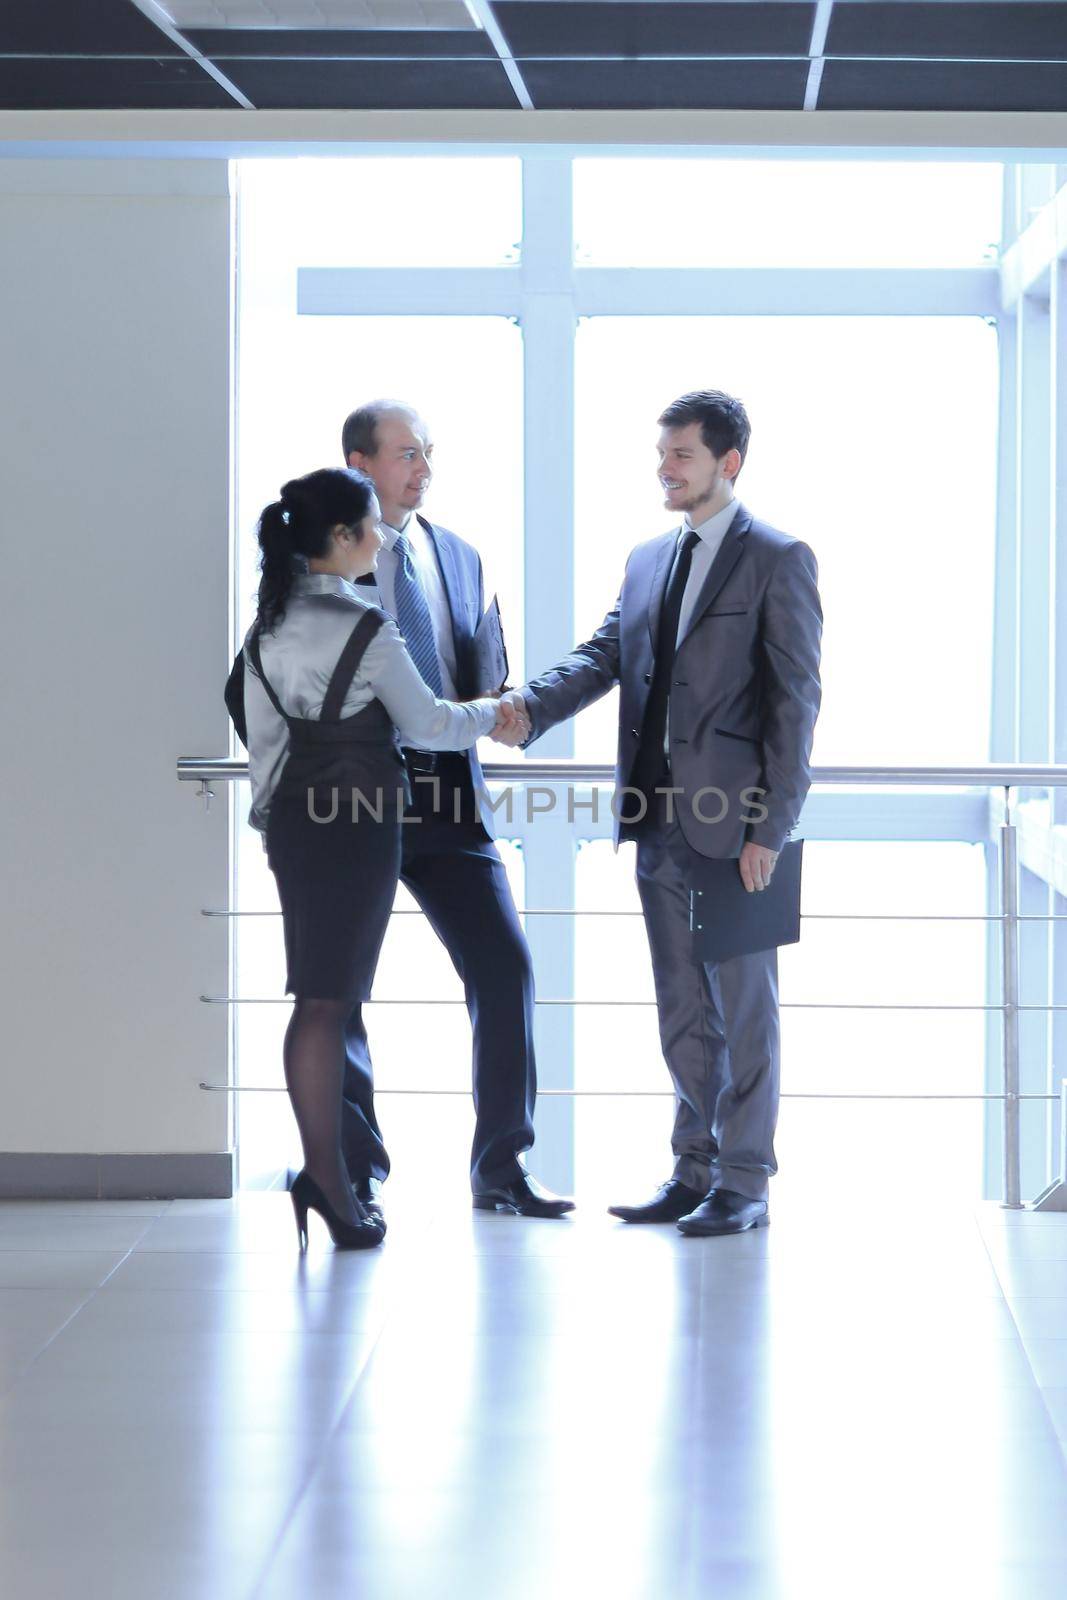 Manager welcomes the client in the lobby office by SmartPhotoLab